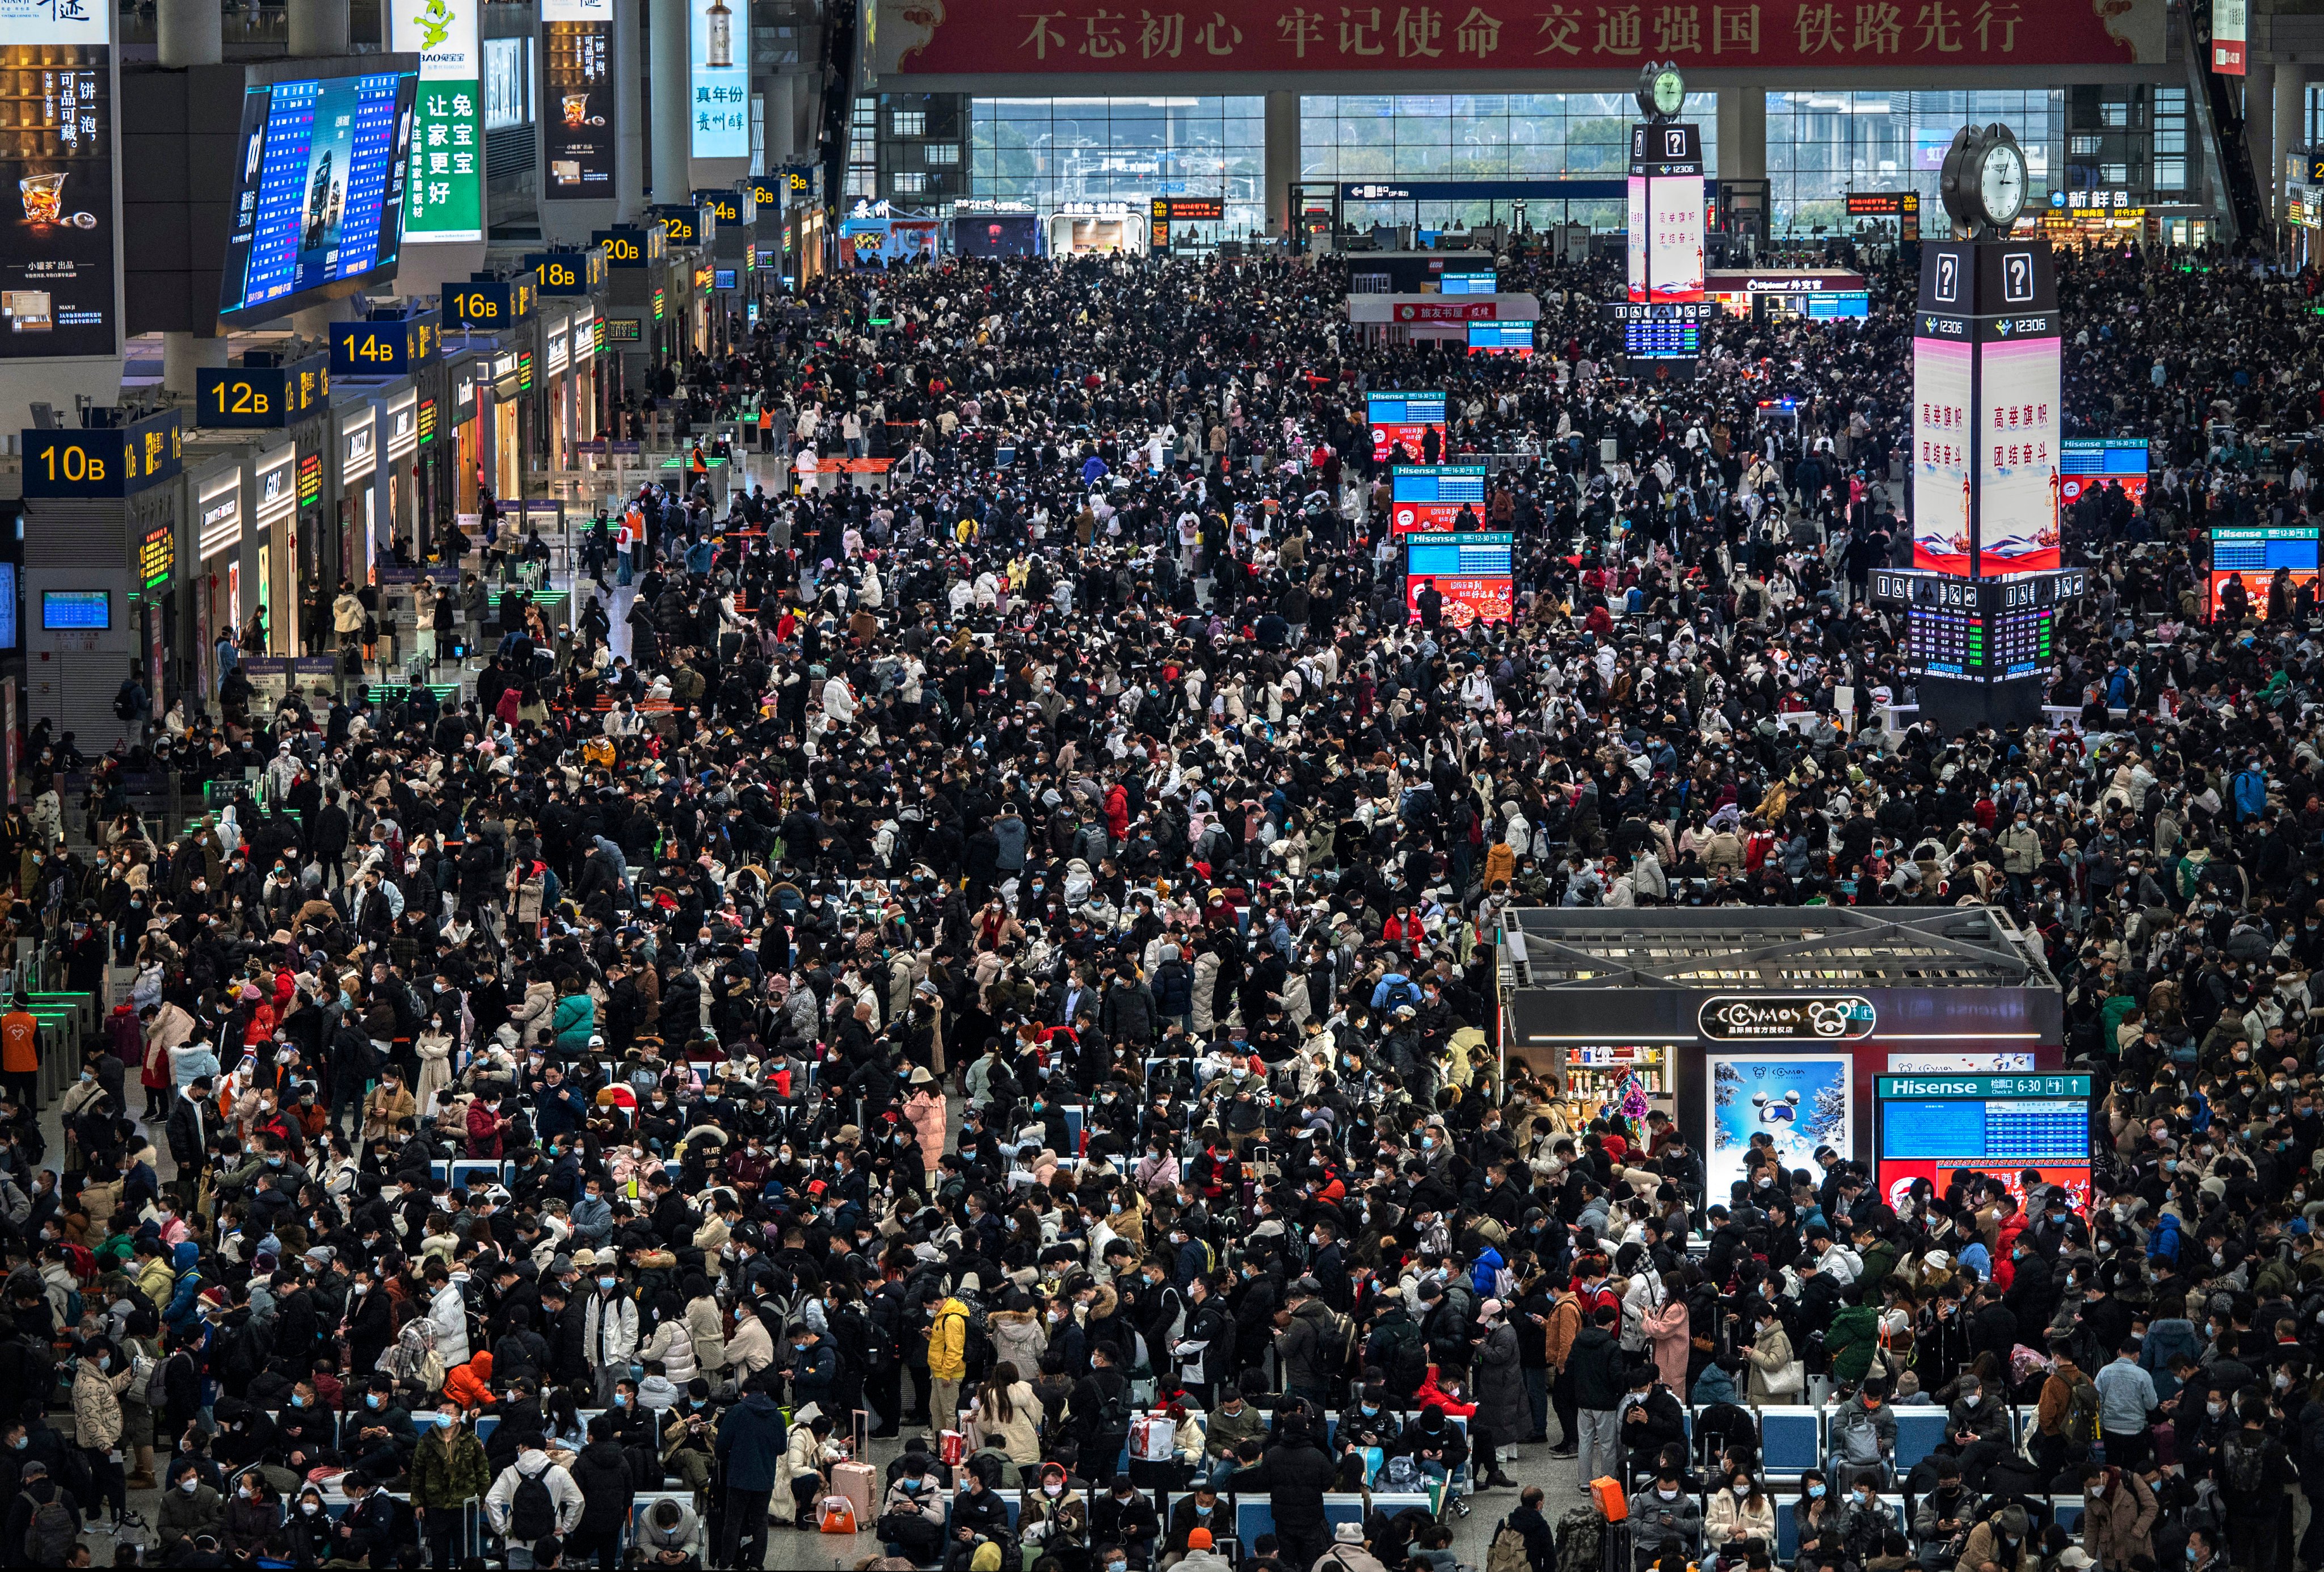 Last year there were huge crowds at the Shanghai Hongqiao Railway Station during the Lunar New Year holiday. This year, the demand is even greater, with many on waiting lists for tickets. Photo: Getty Images